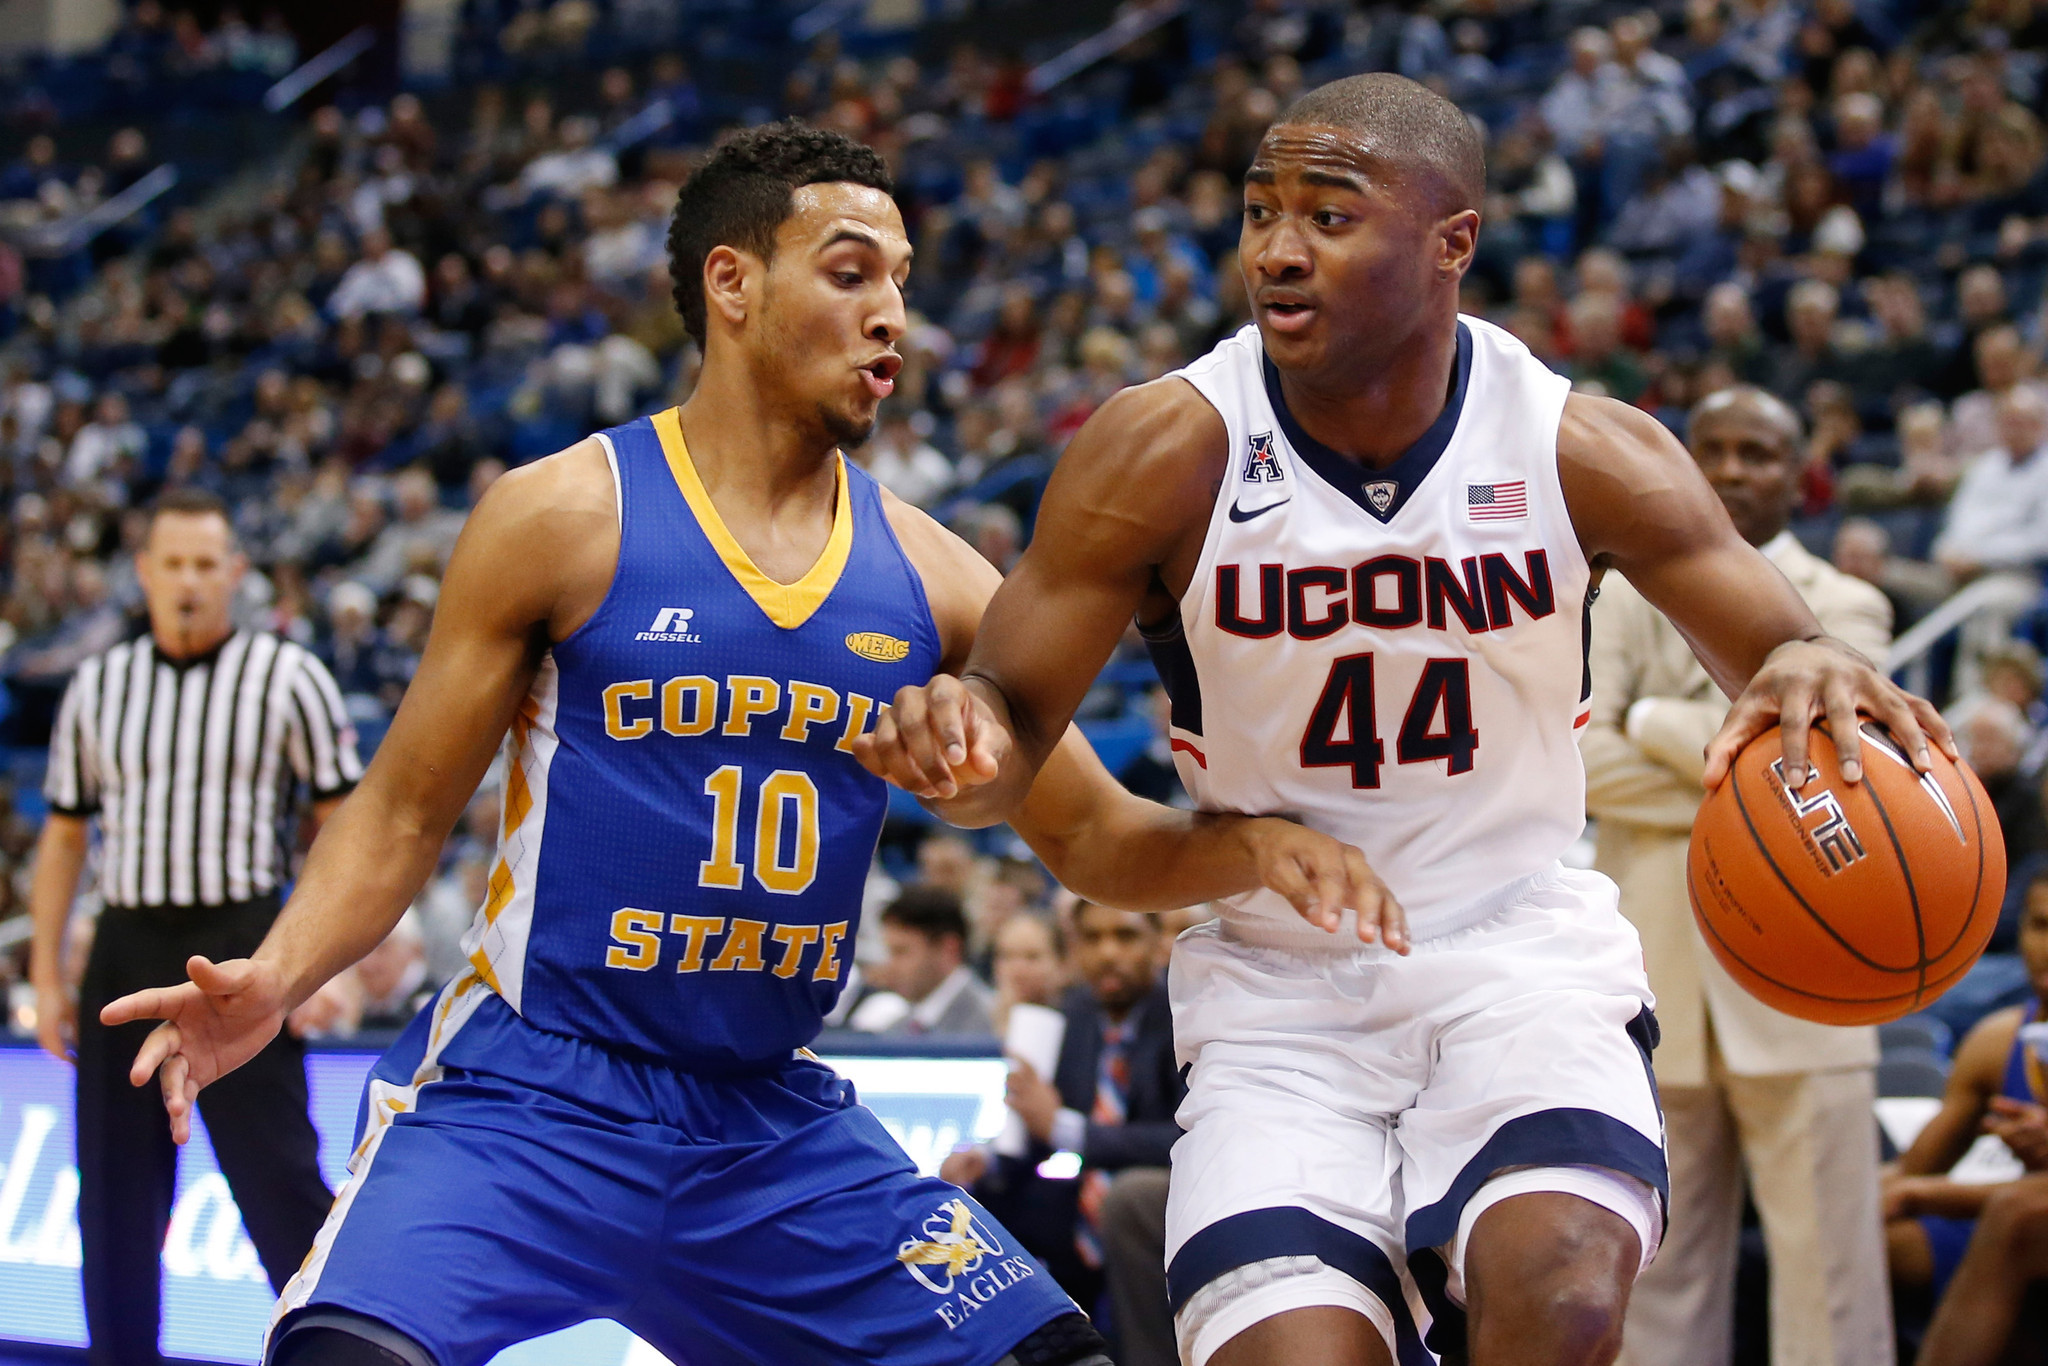 Live Coppin State Vs Georgetown Online | Coppin State Vs Georgetown Stream